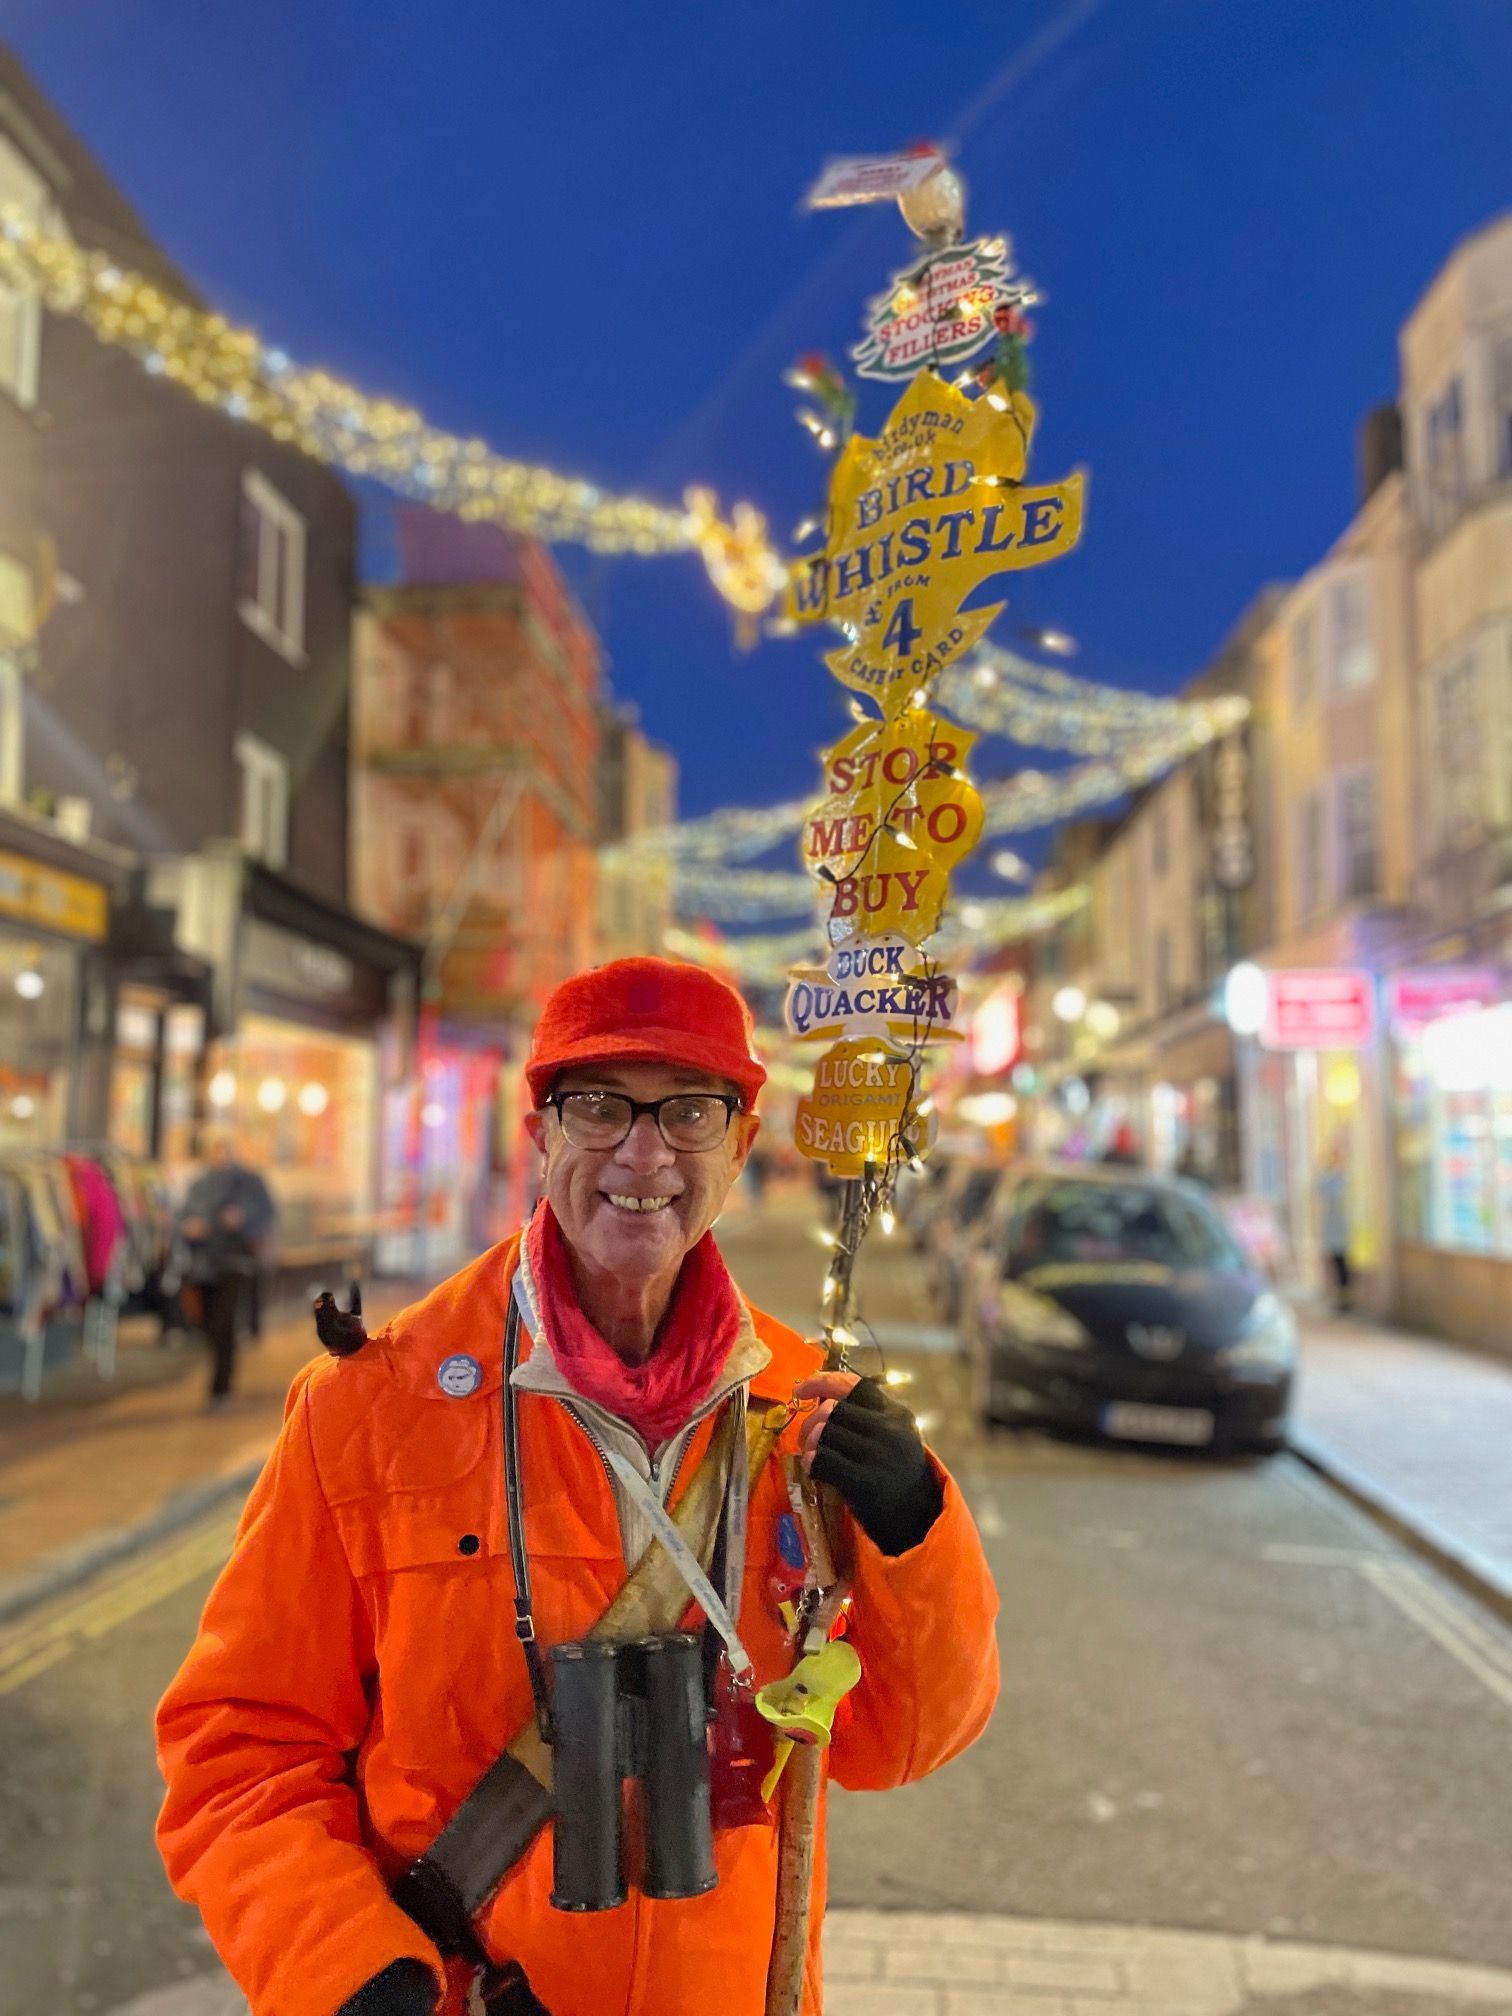 The birdyman, a white man wearing glasses, an orange jacket, binoculars and holding a pole adorned with signs advertising h